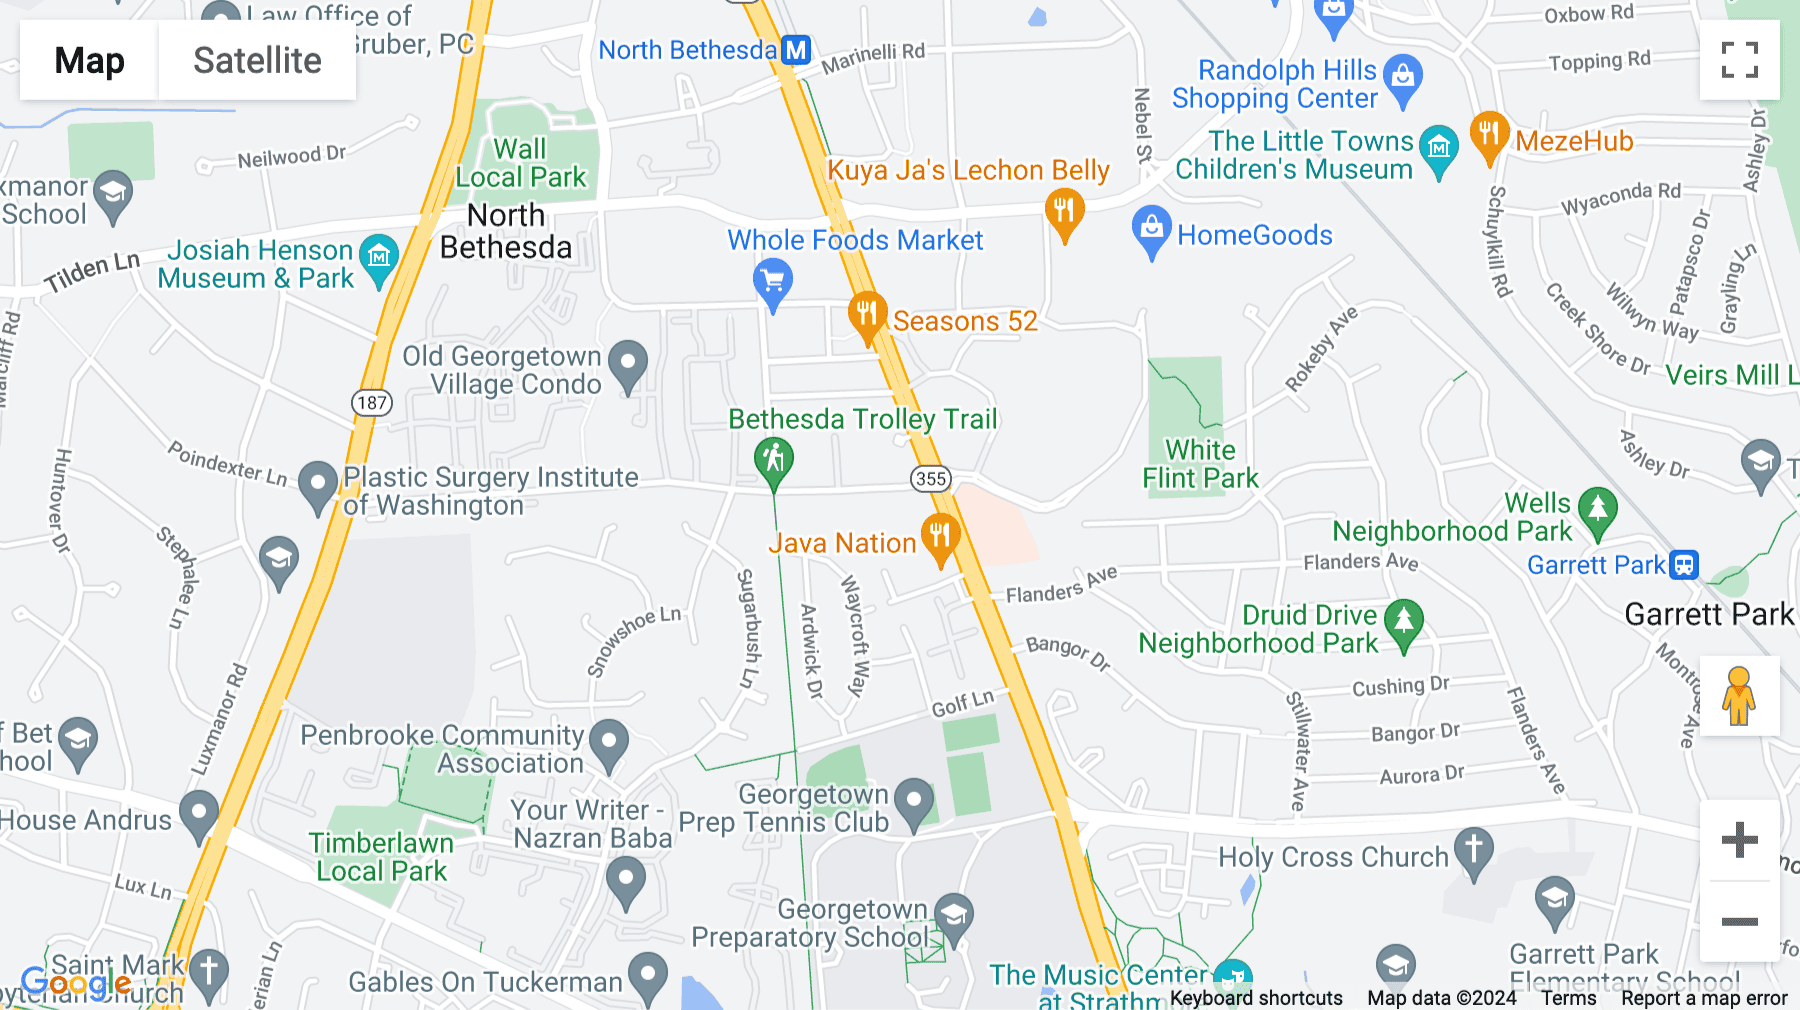 Click for interative map of 11140 Rockville Pike, Suite 400, Rockville, Maryland, USA, Rockville